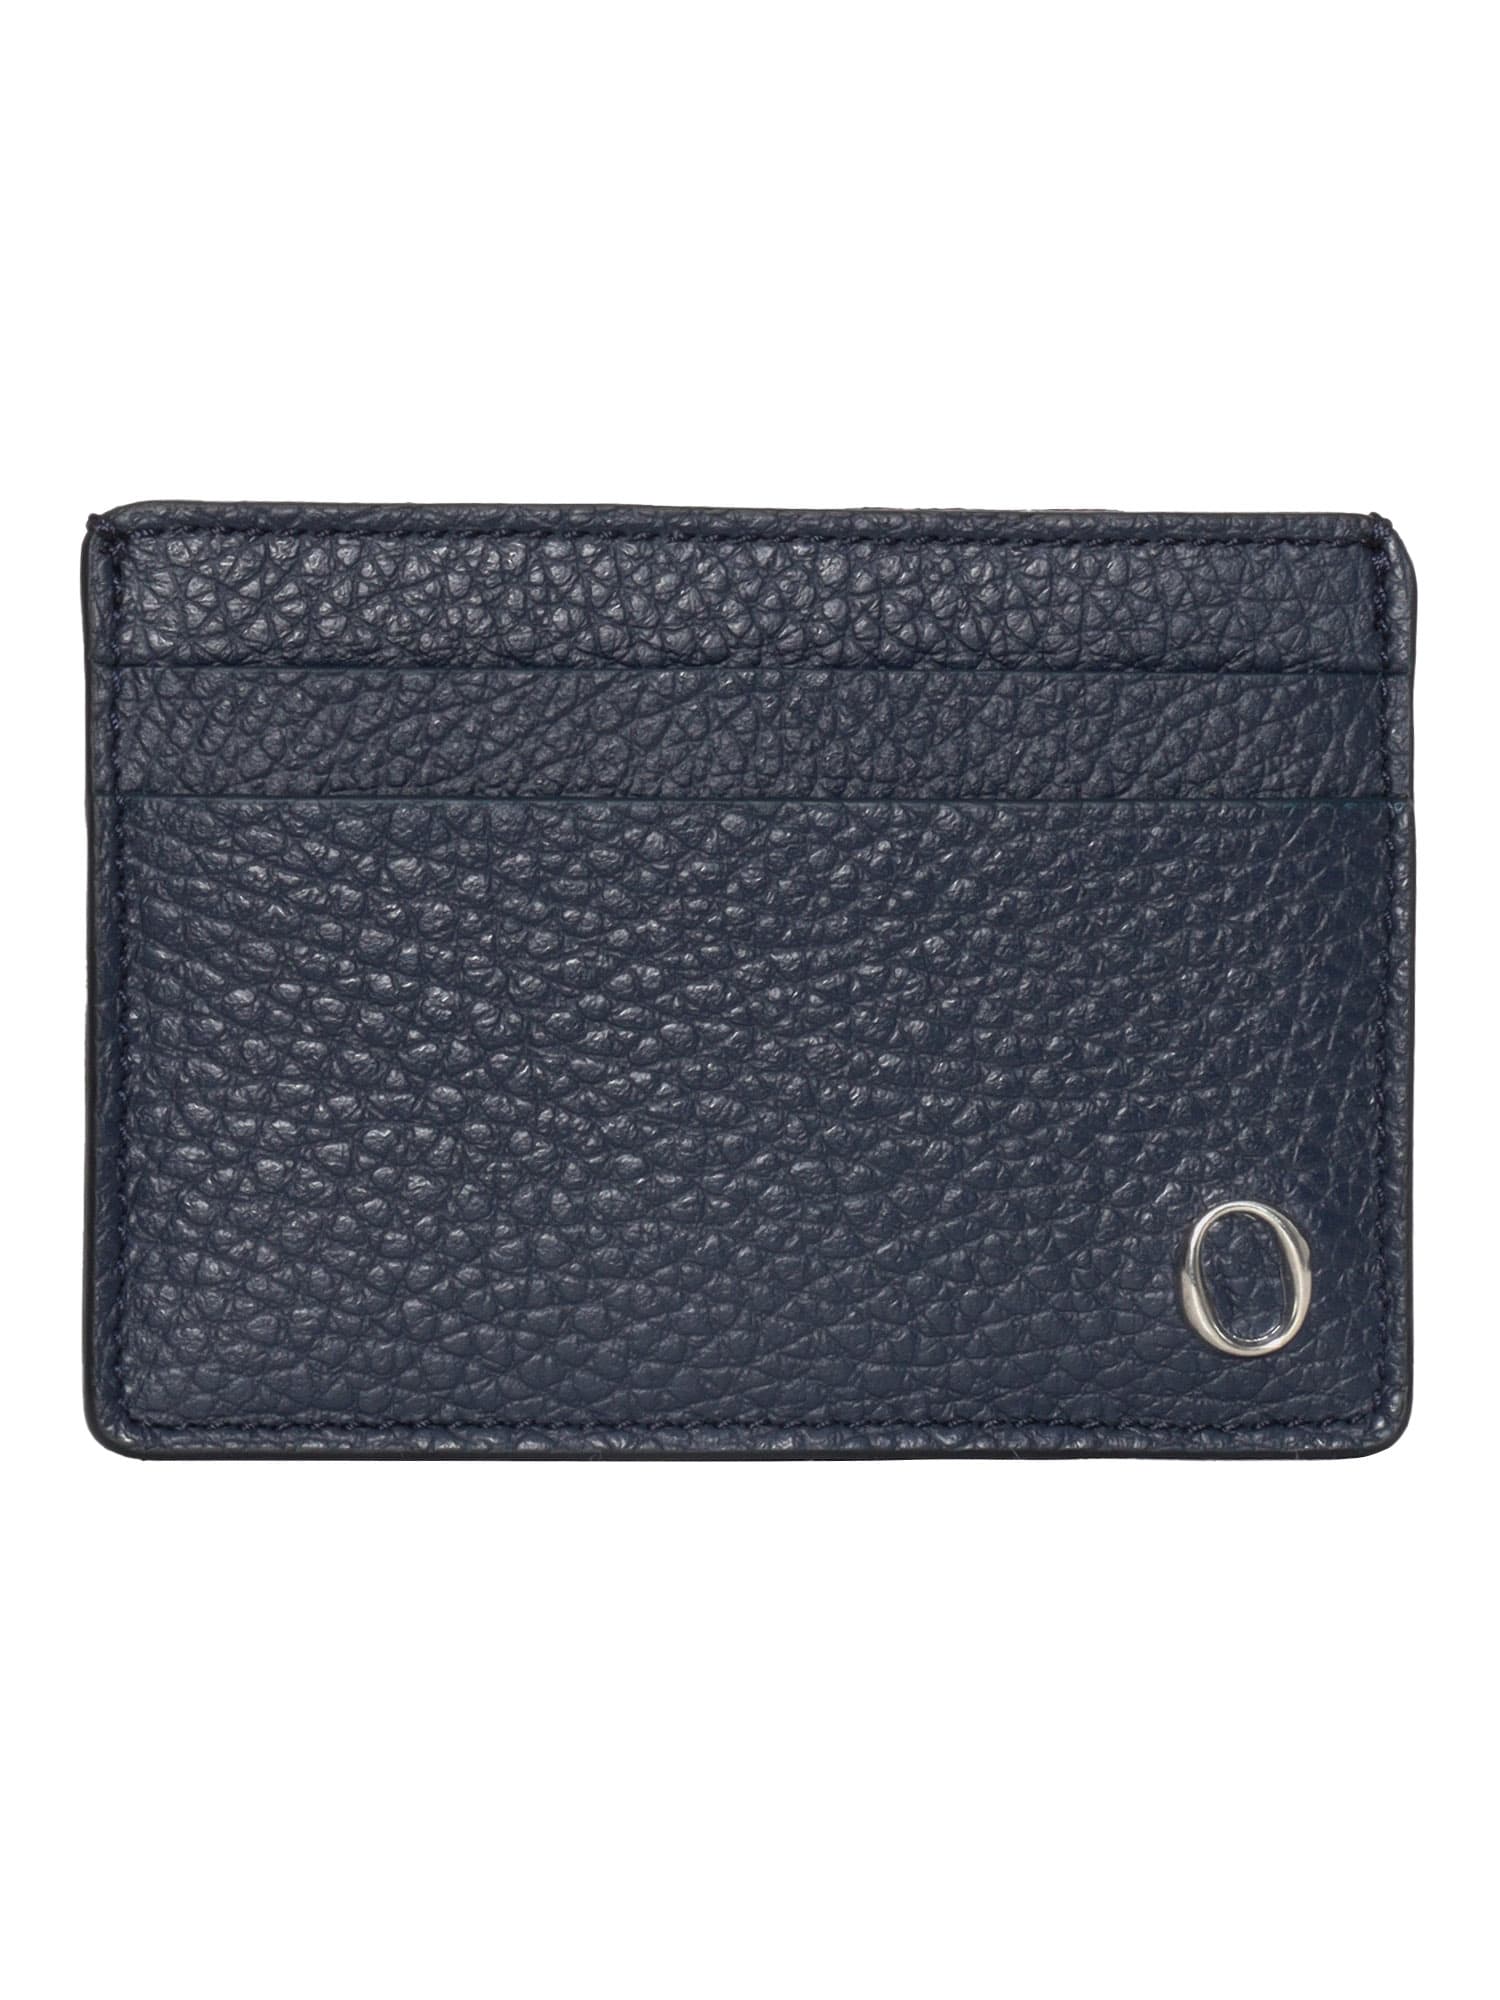 Orciani Micron Card Holder In Blue